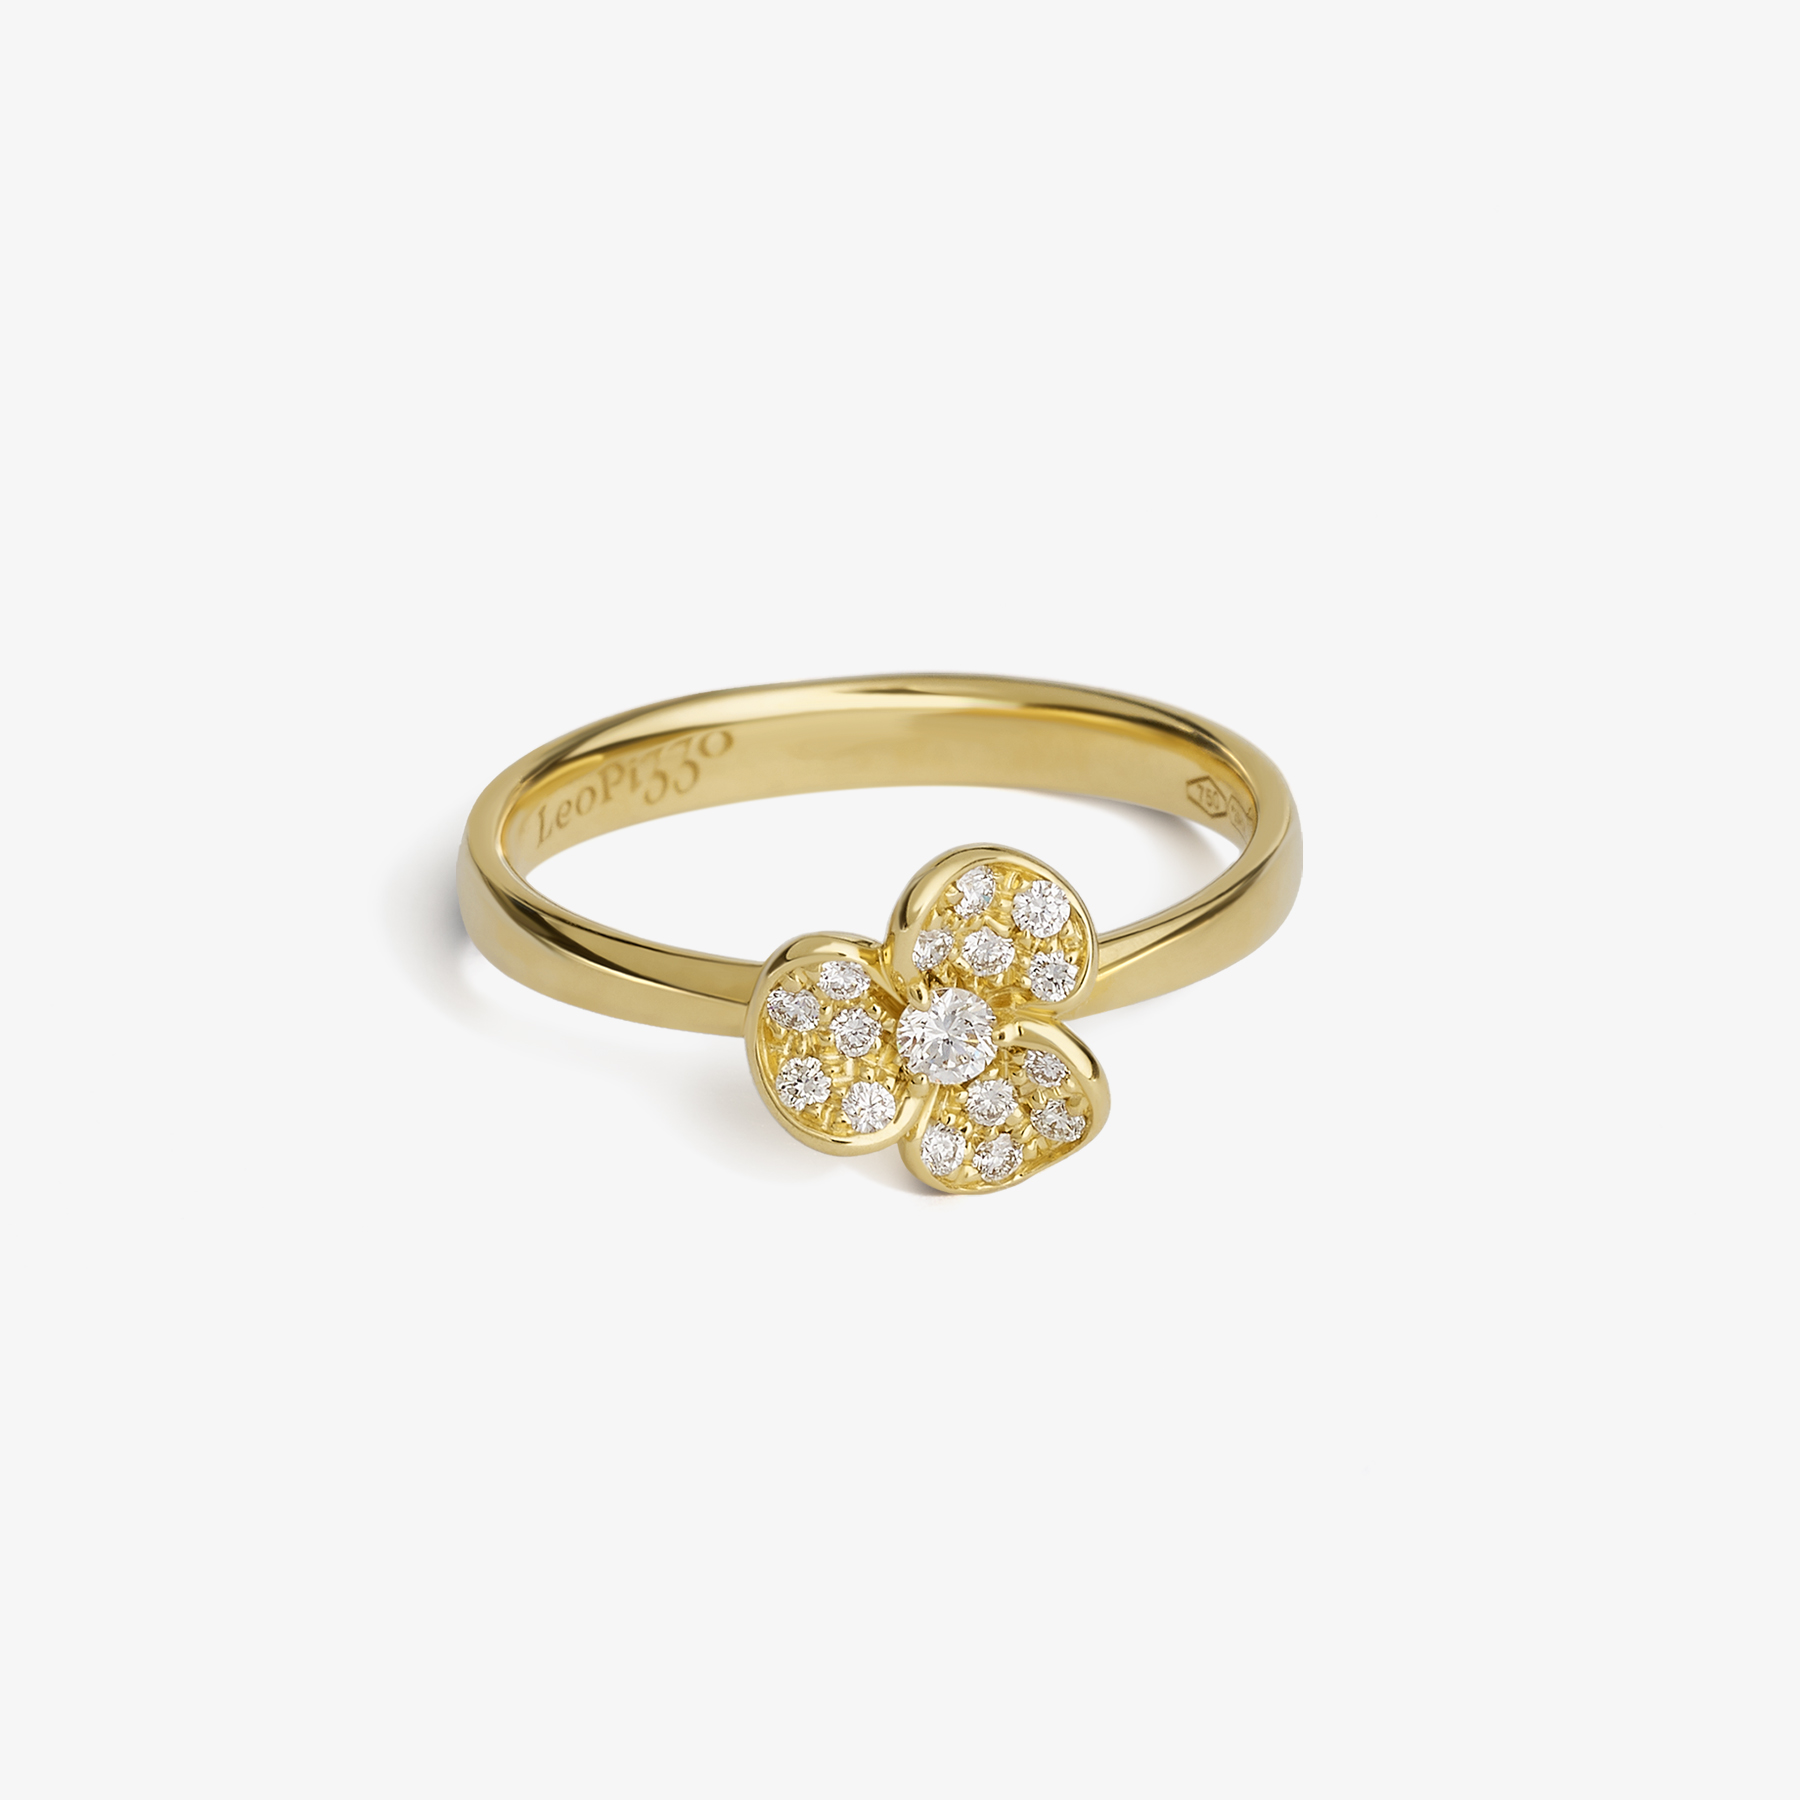 Candy Flora ring